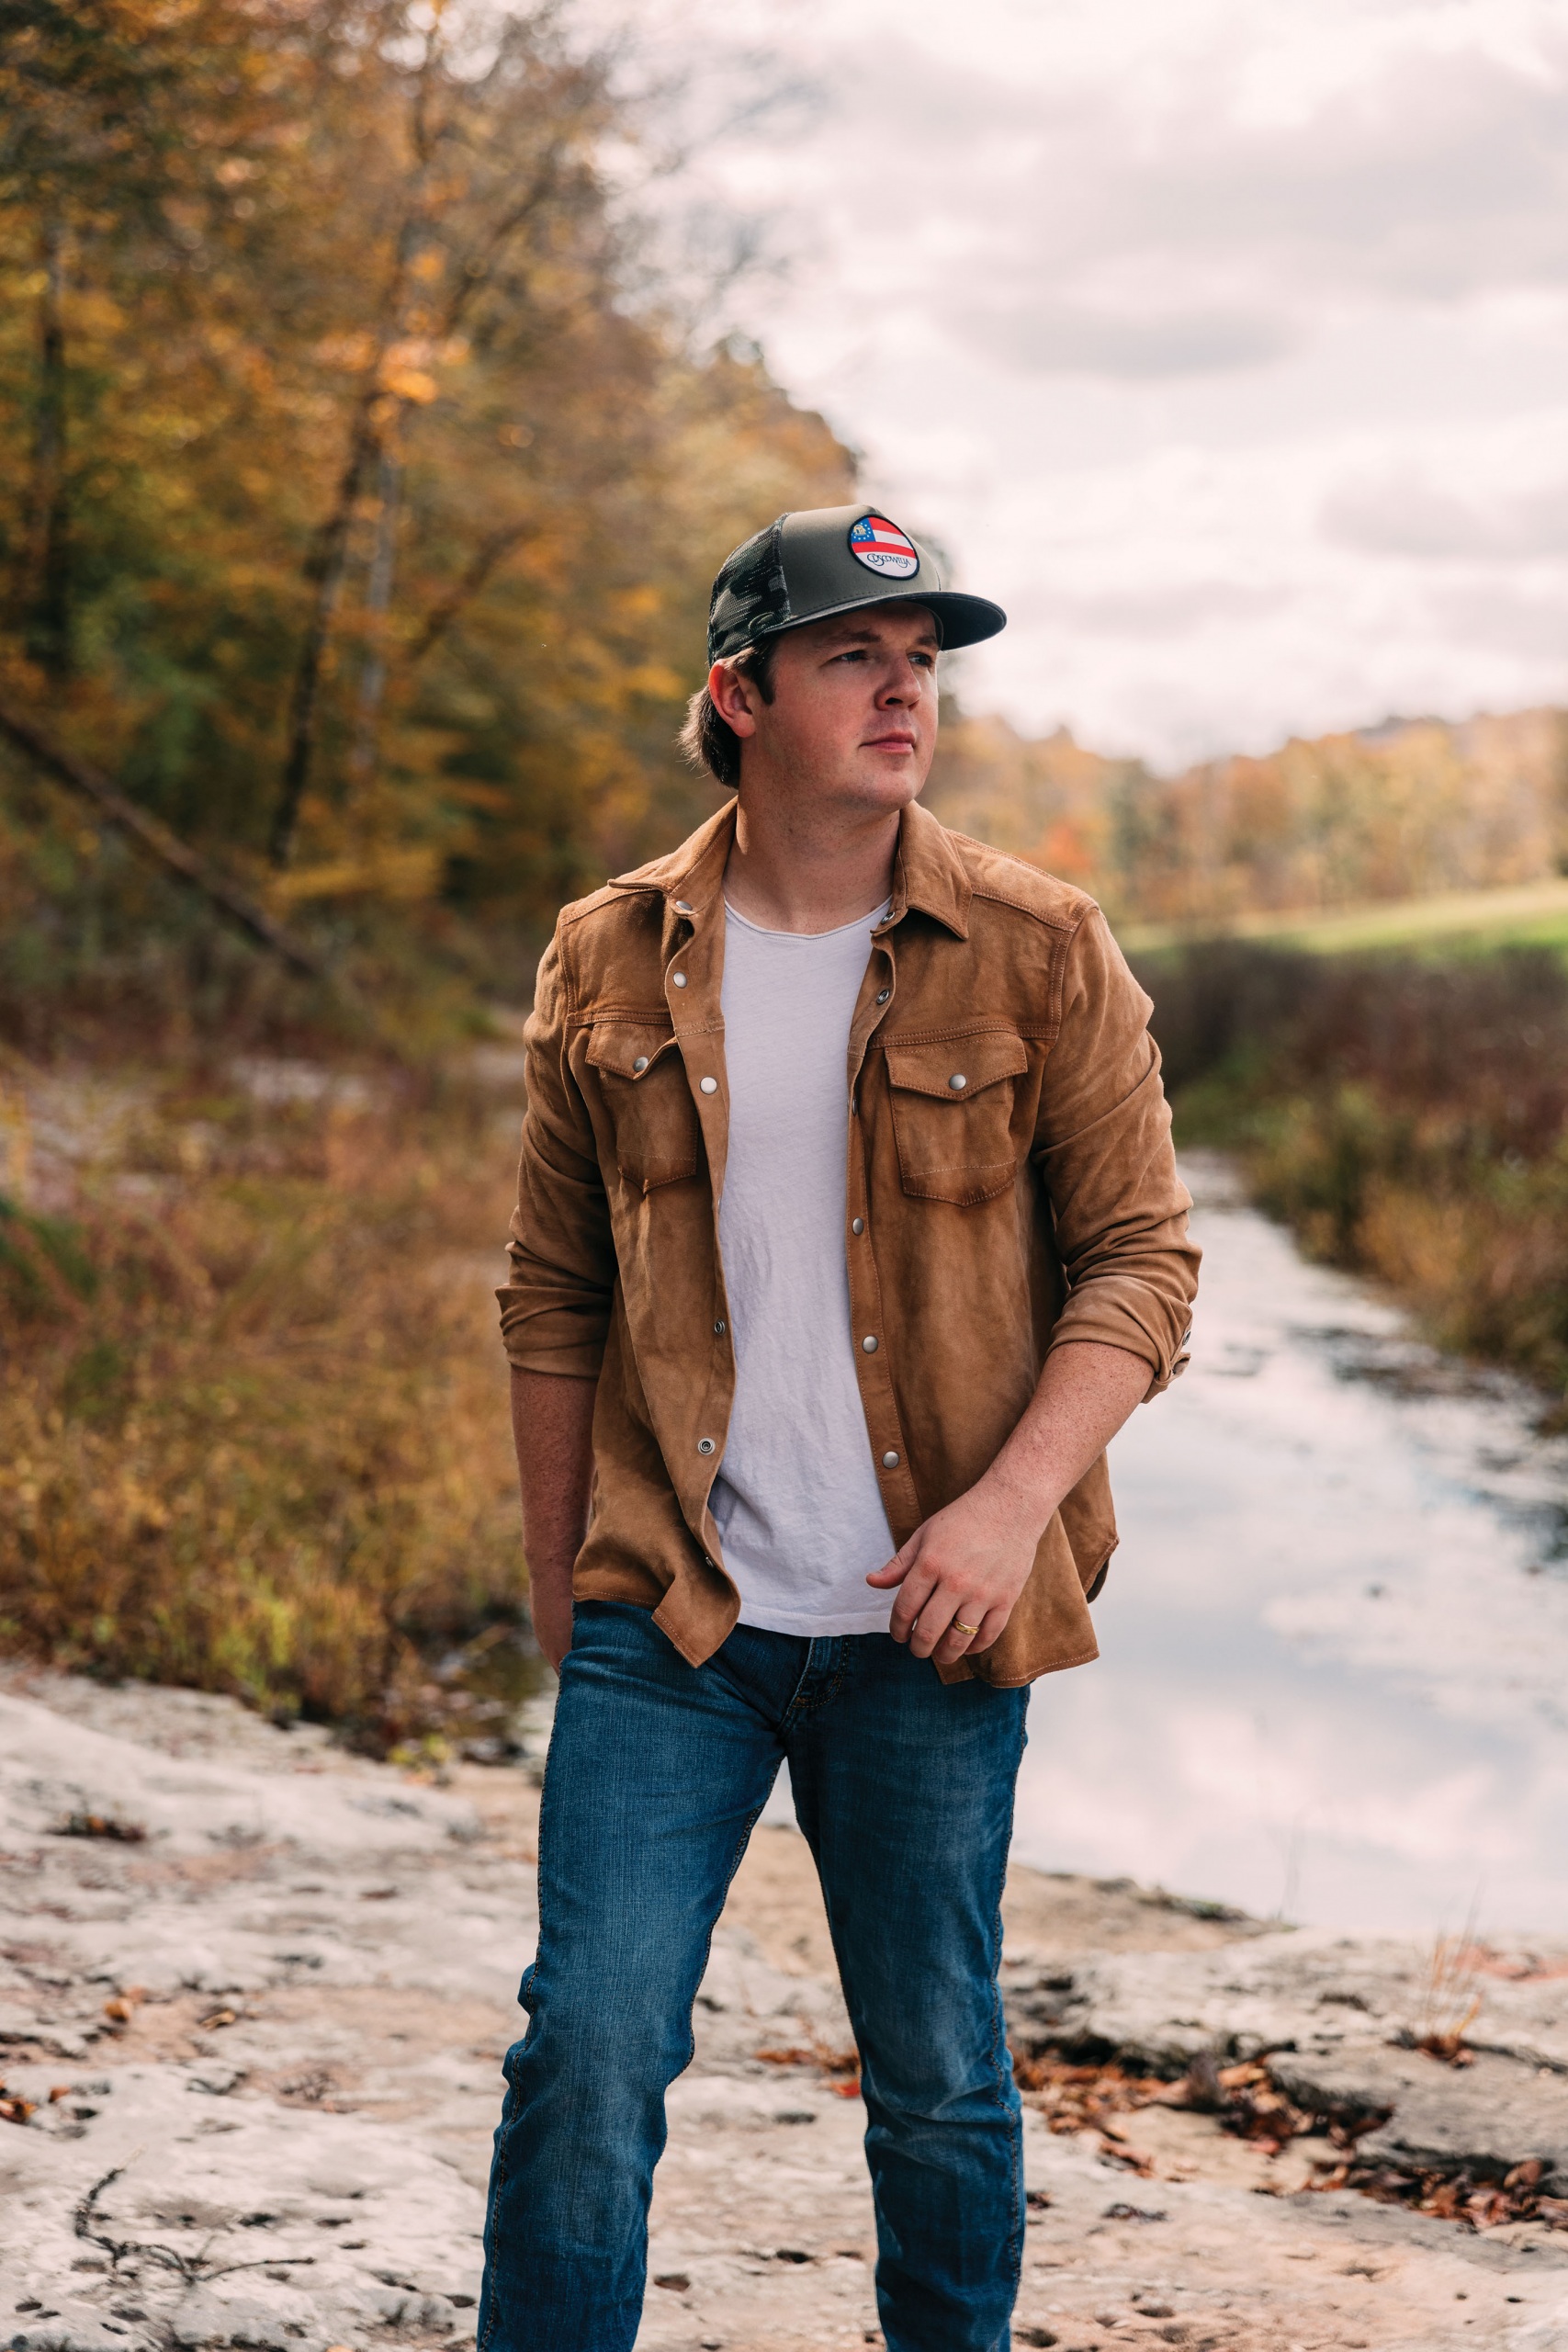 TRAVIS DENNING TRAVELS TO ‘ROADS THAT GO NOWHERE.’